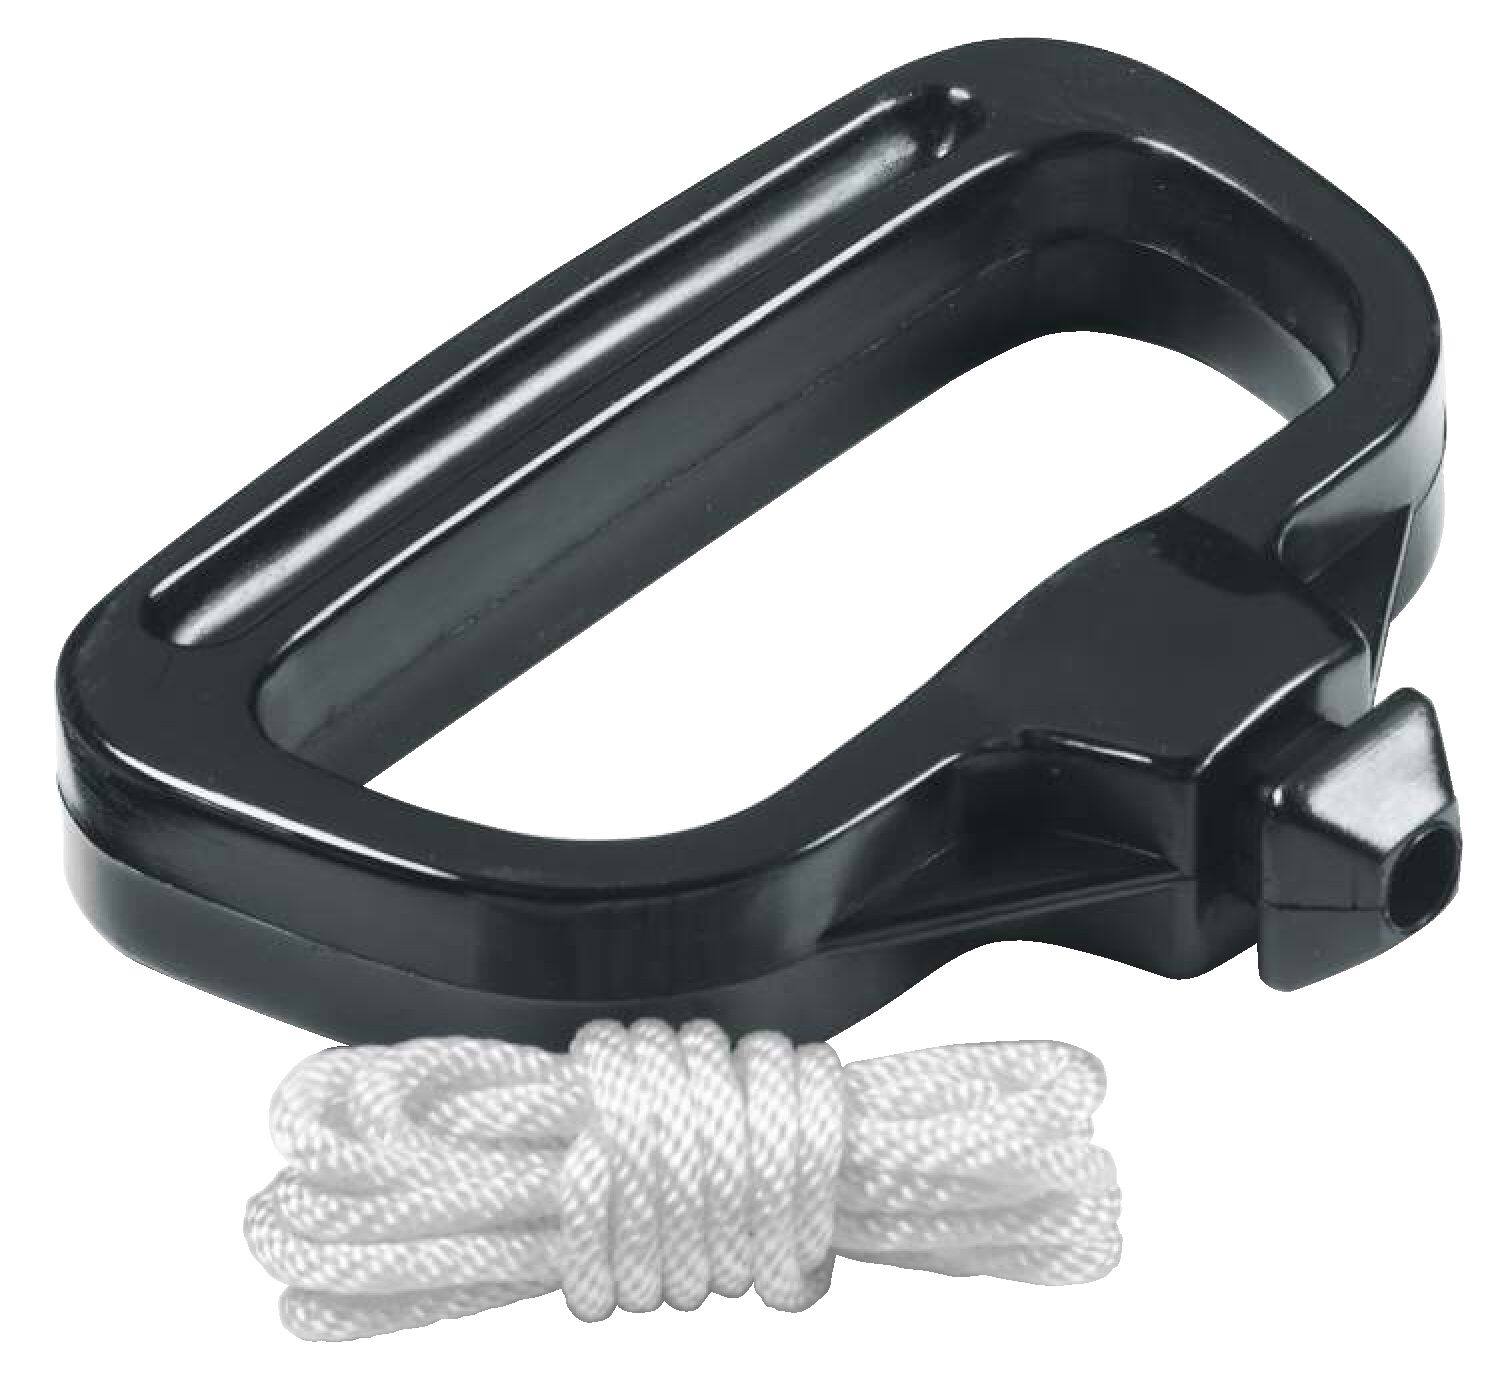 Kimpex Replacement Starter Rope for Arctic Cat & Yamaha Models, 10-ft